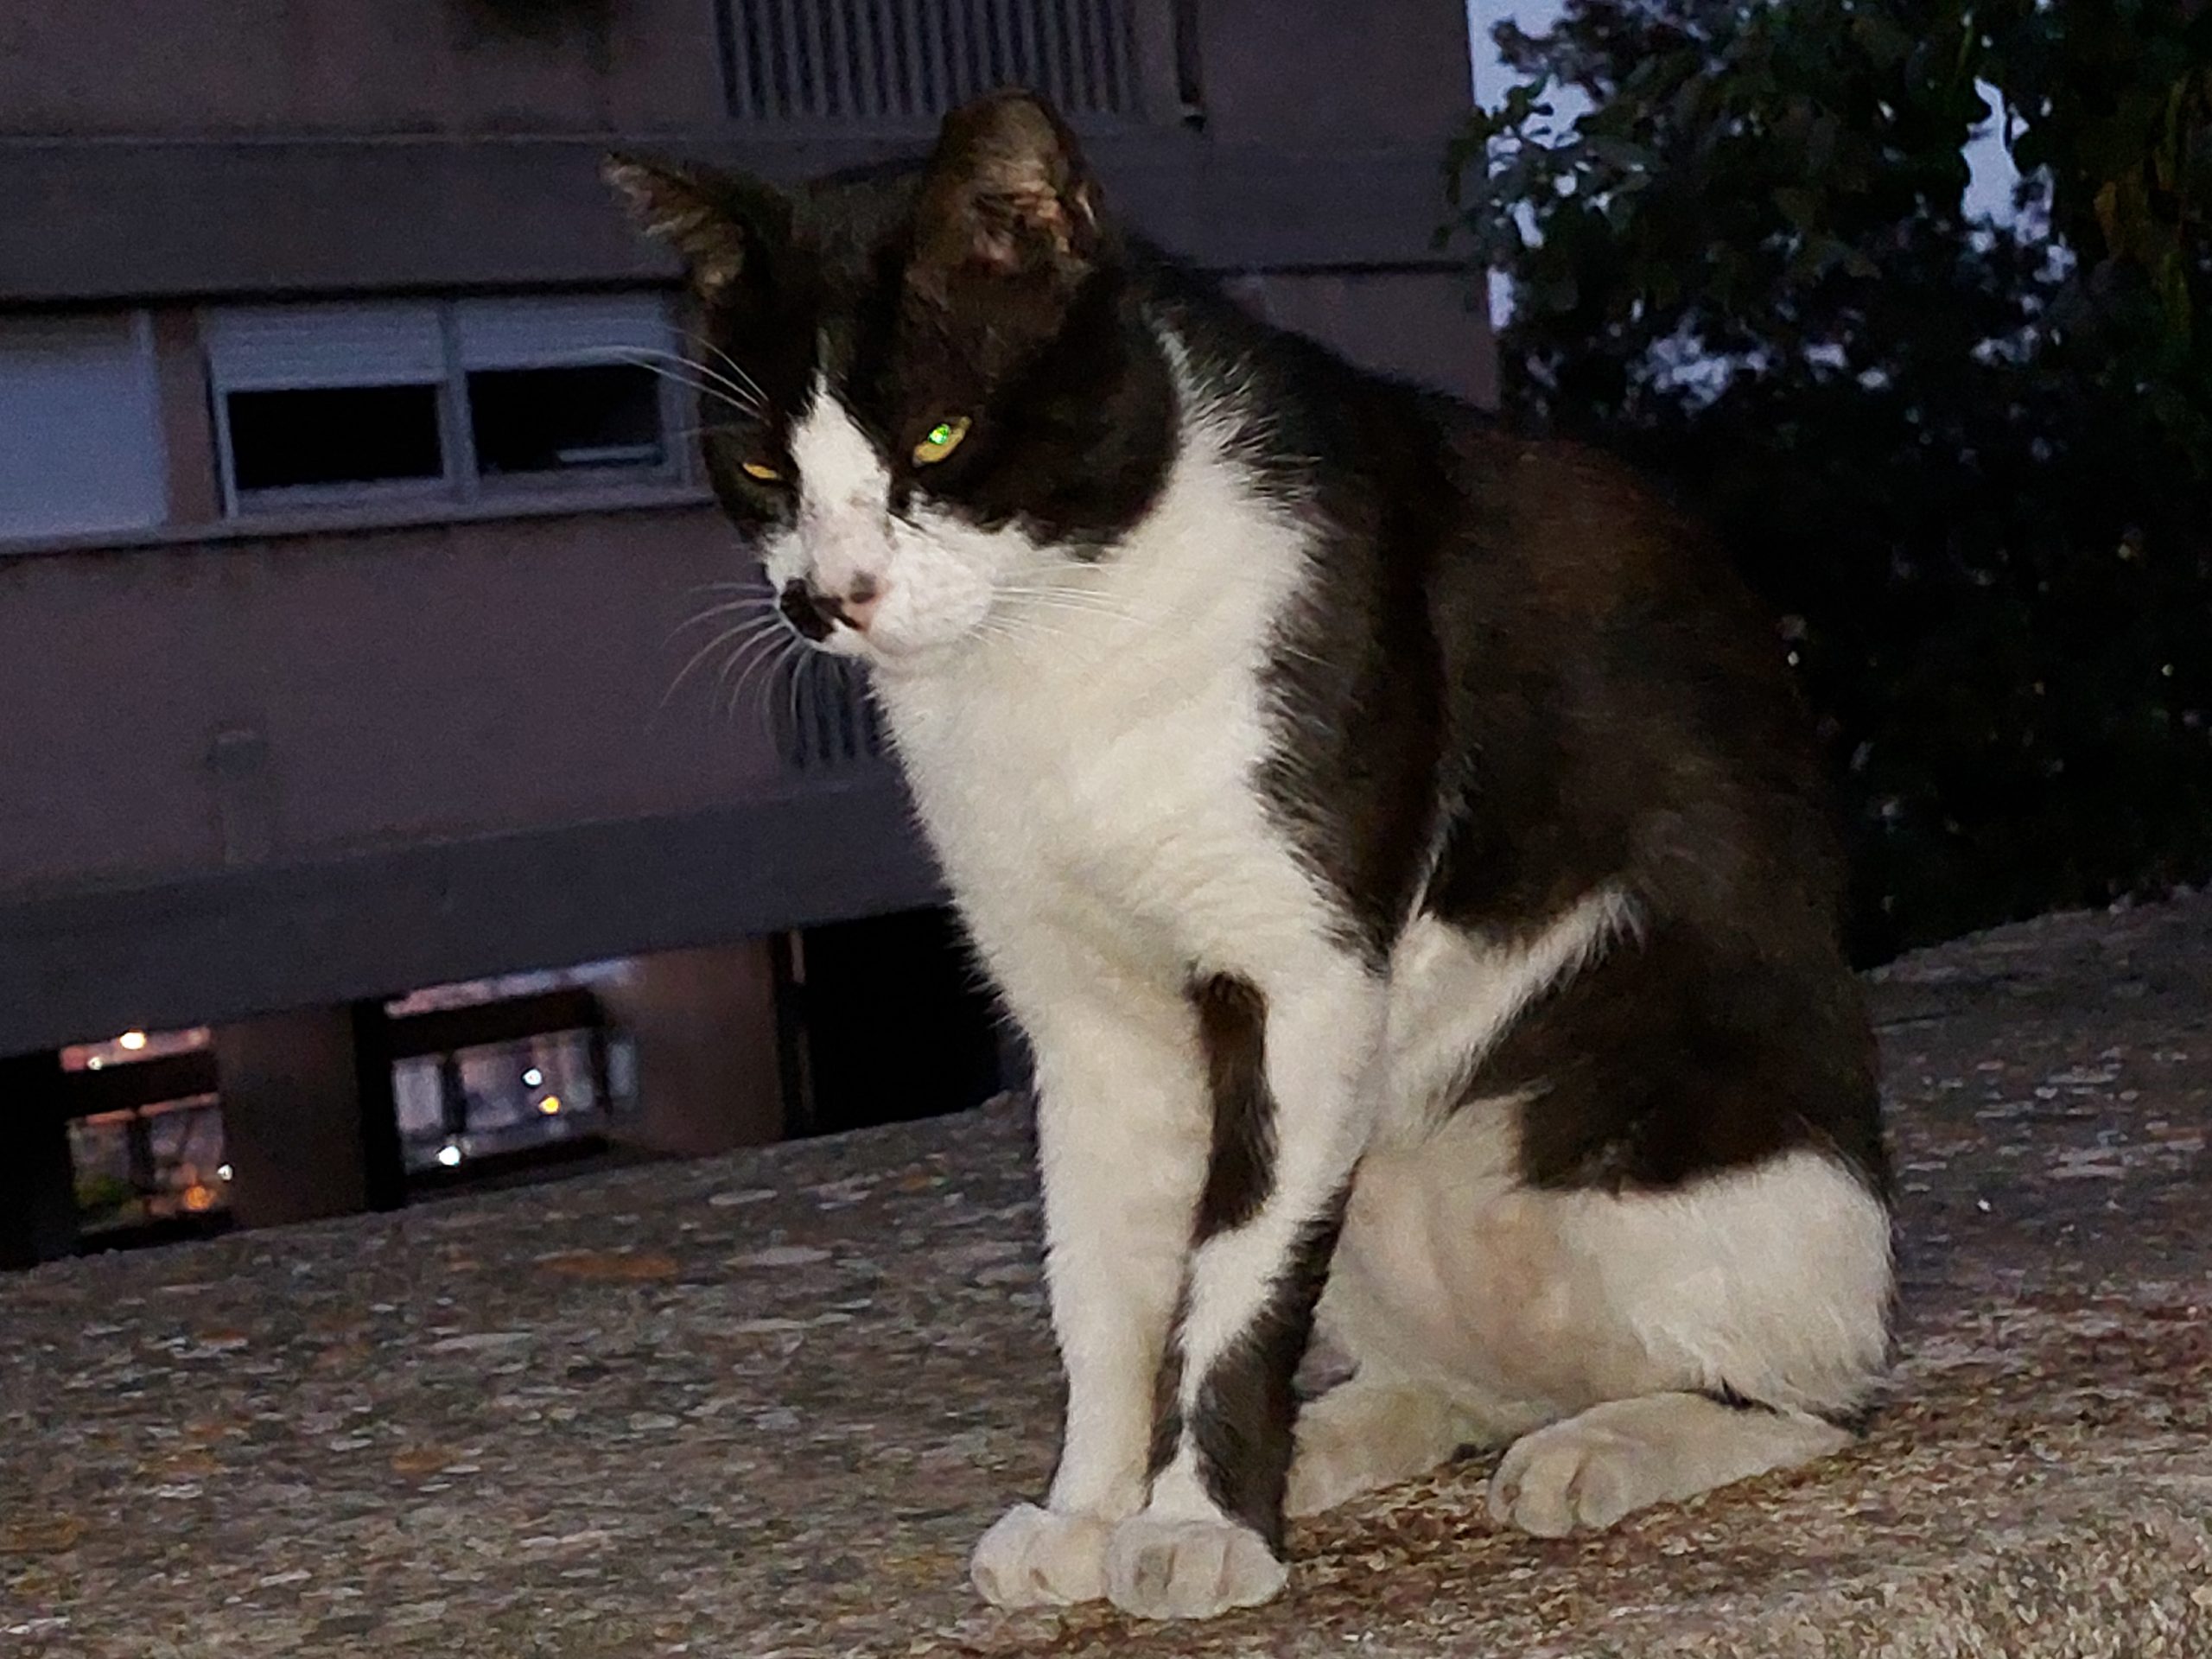 Israel’s population of street cats is now believed to have reached the one million mark